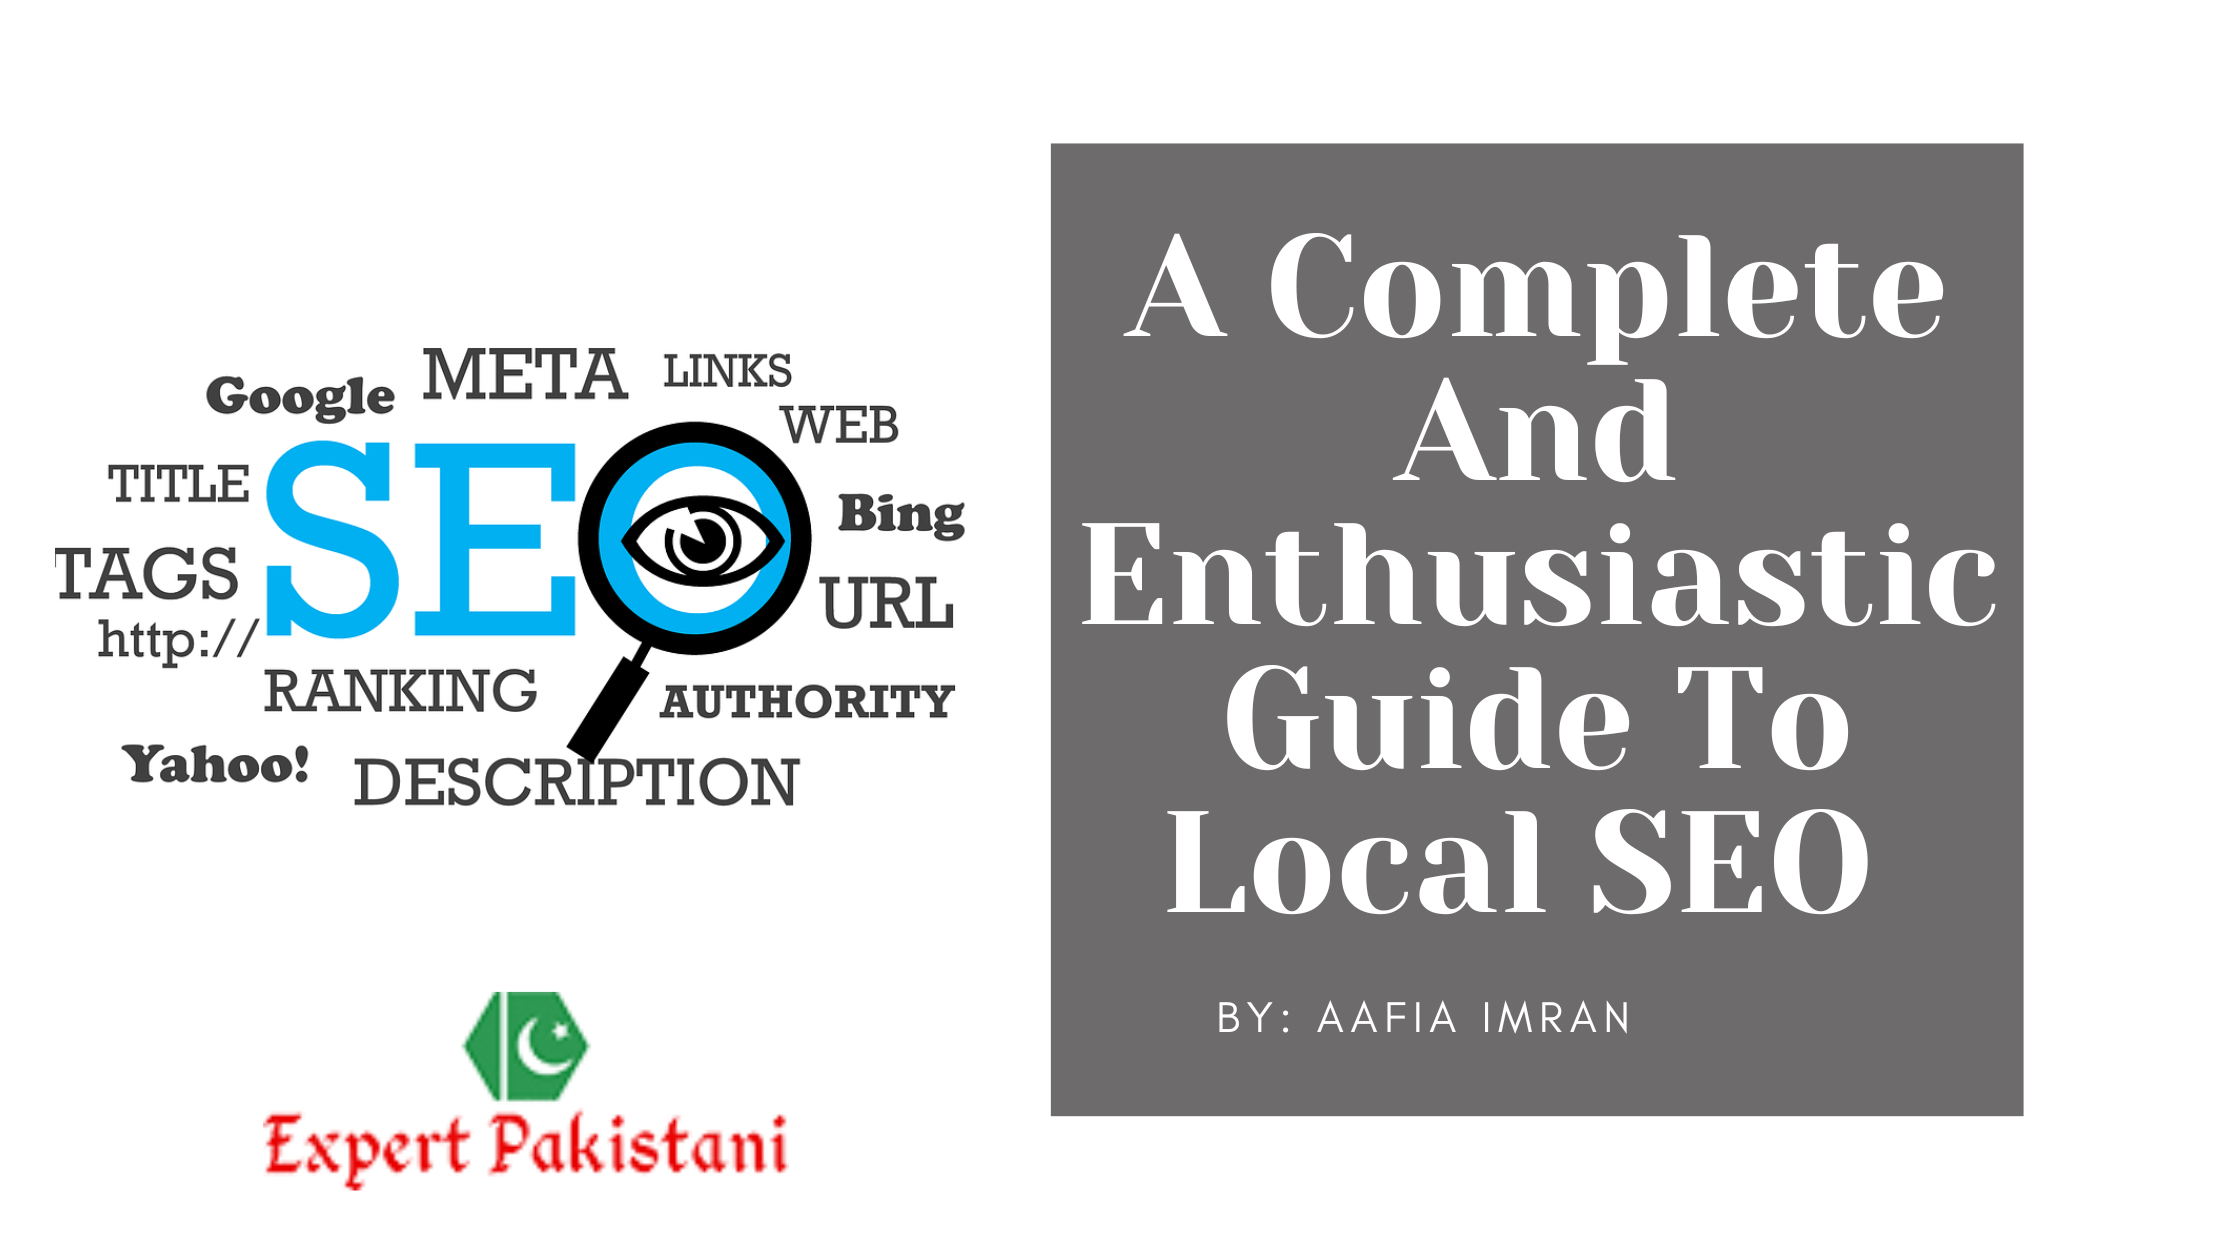 A Complete And Enthusiastic Guide To Local SEO